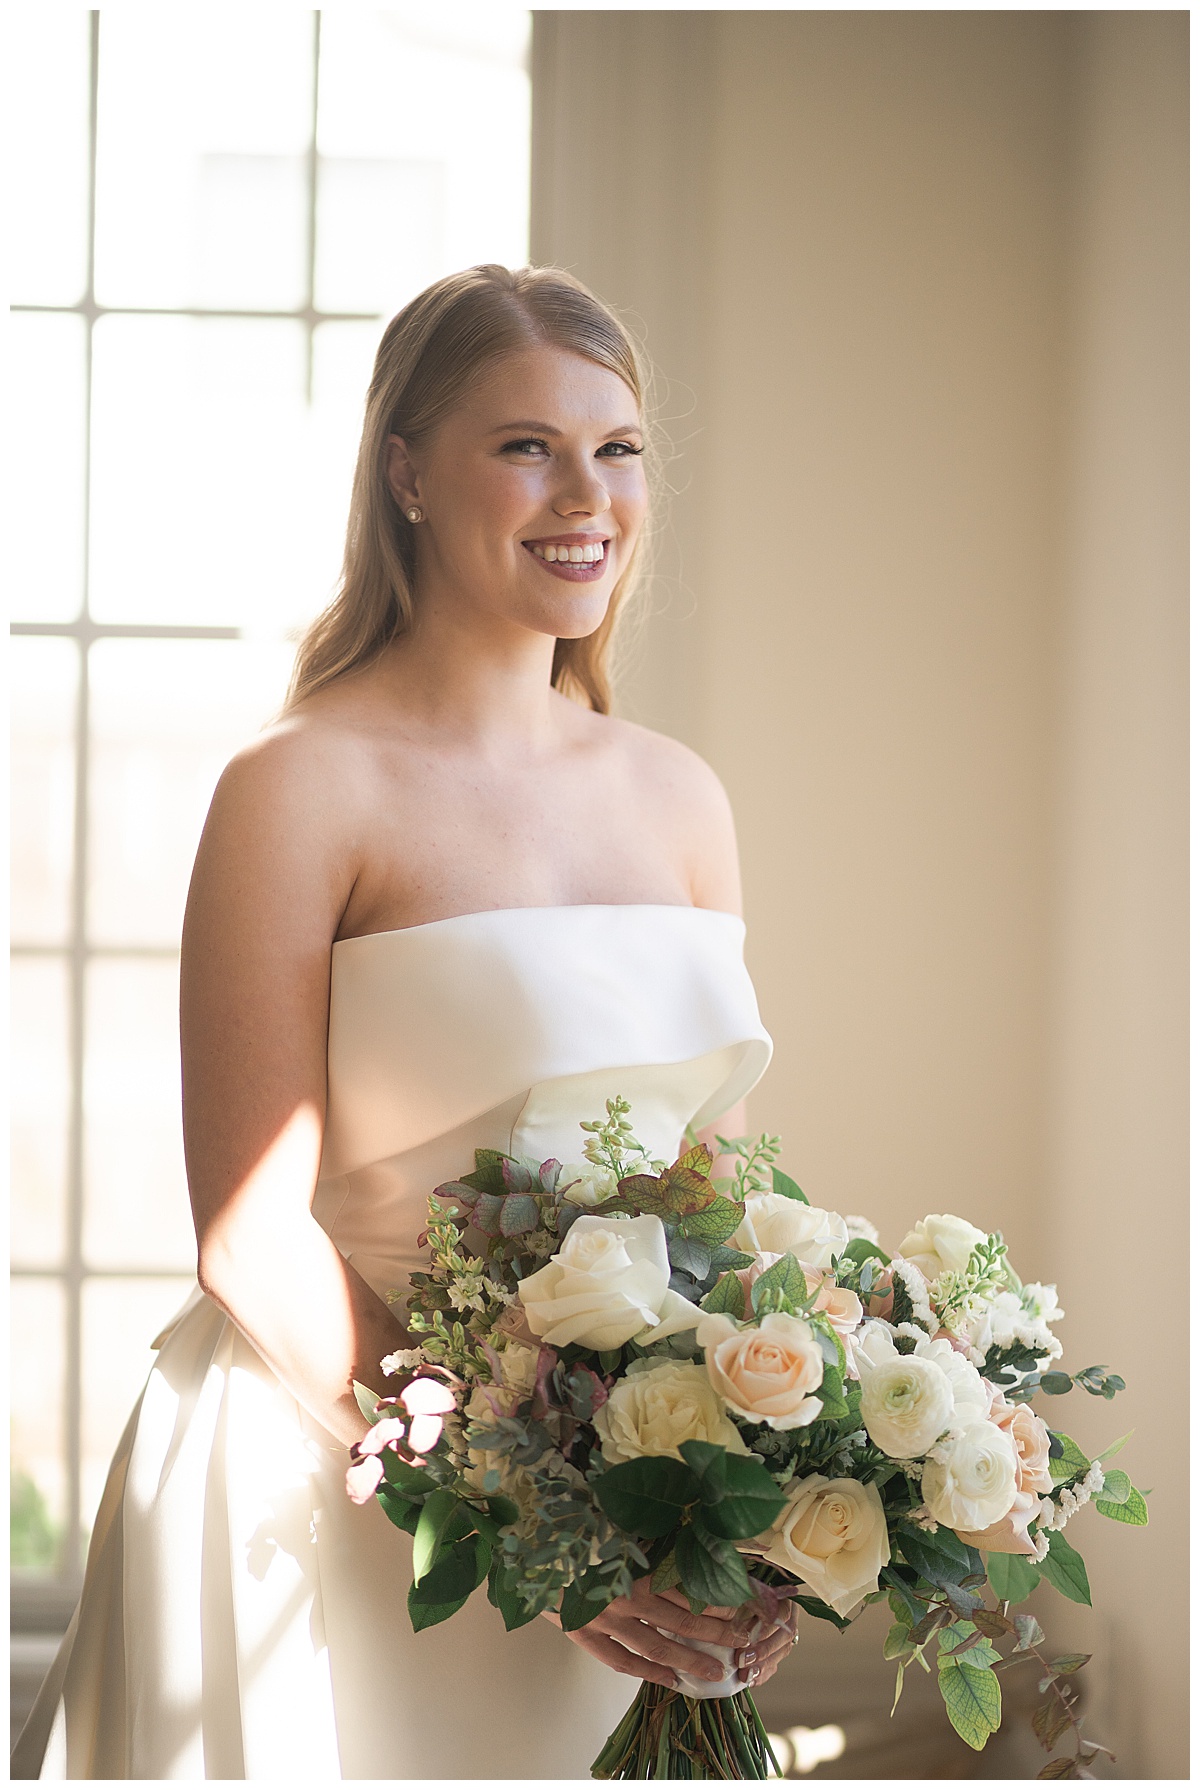 Gorgeous woman smiles big holding bridal bouquet for Stunning Bridal Portraits at The Creative Chateau